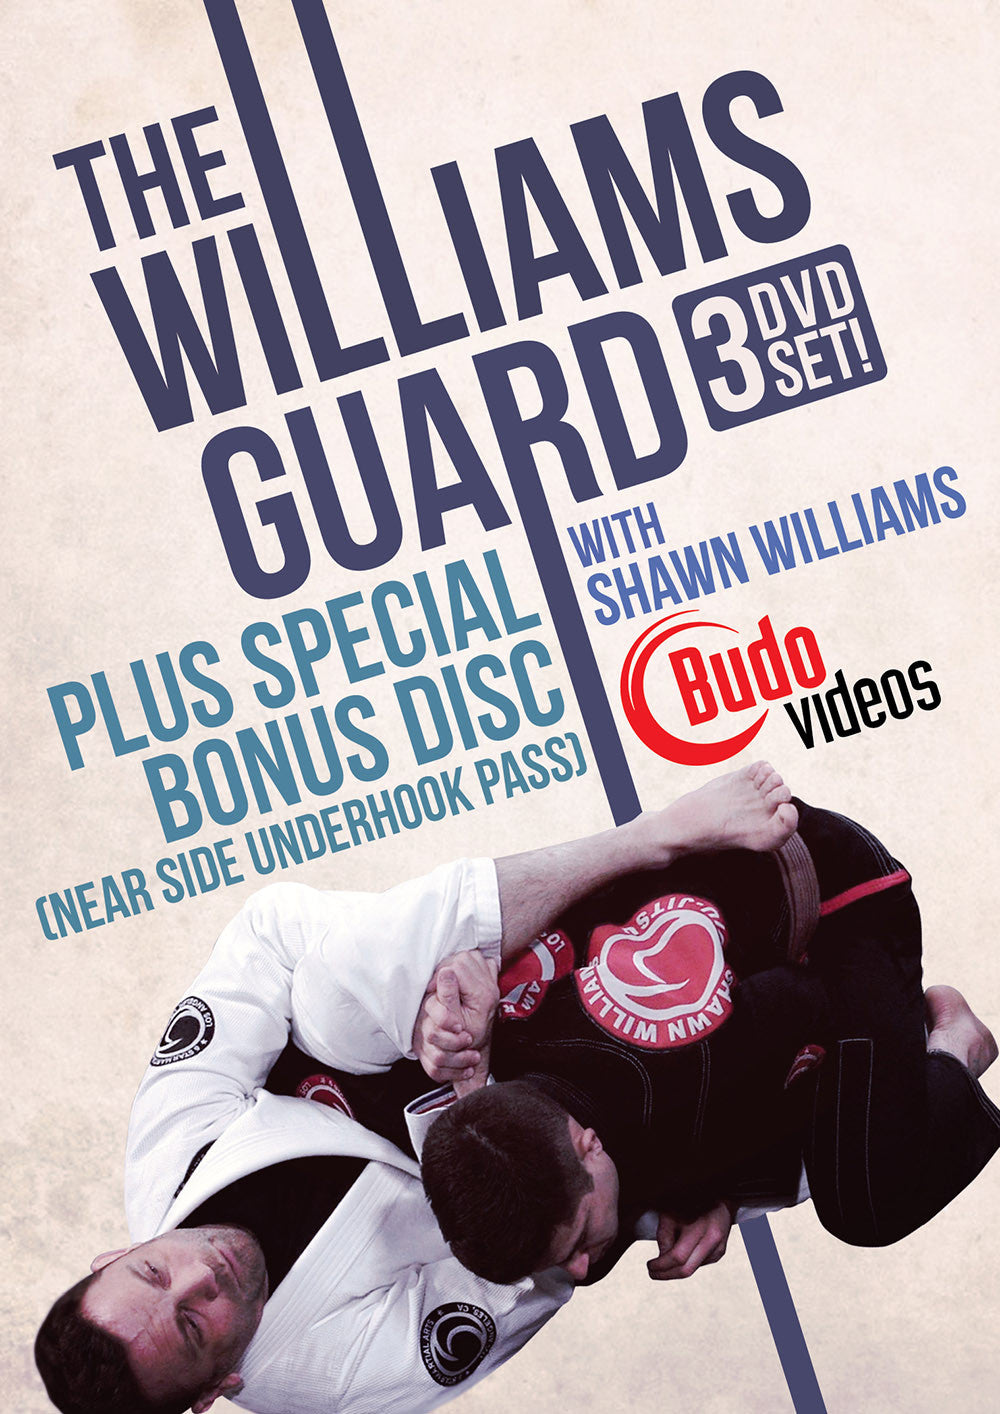 The Williams Guard 3 DVD Set by Shawn Williams - Budovideos Inc